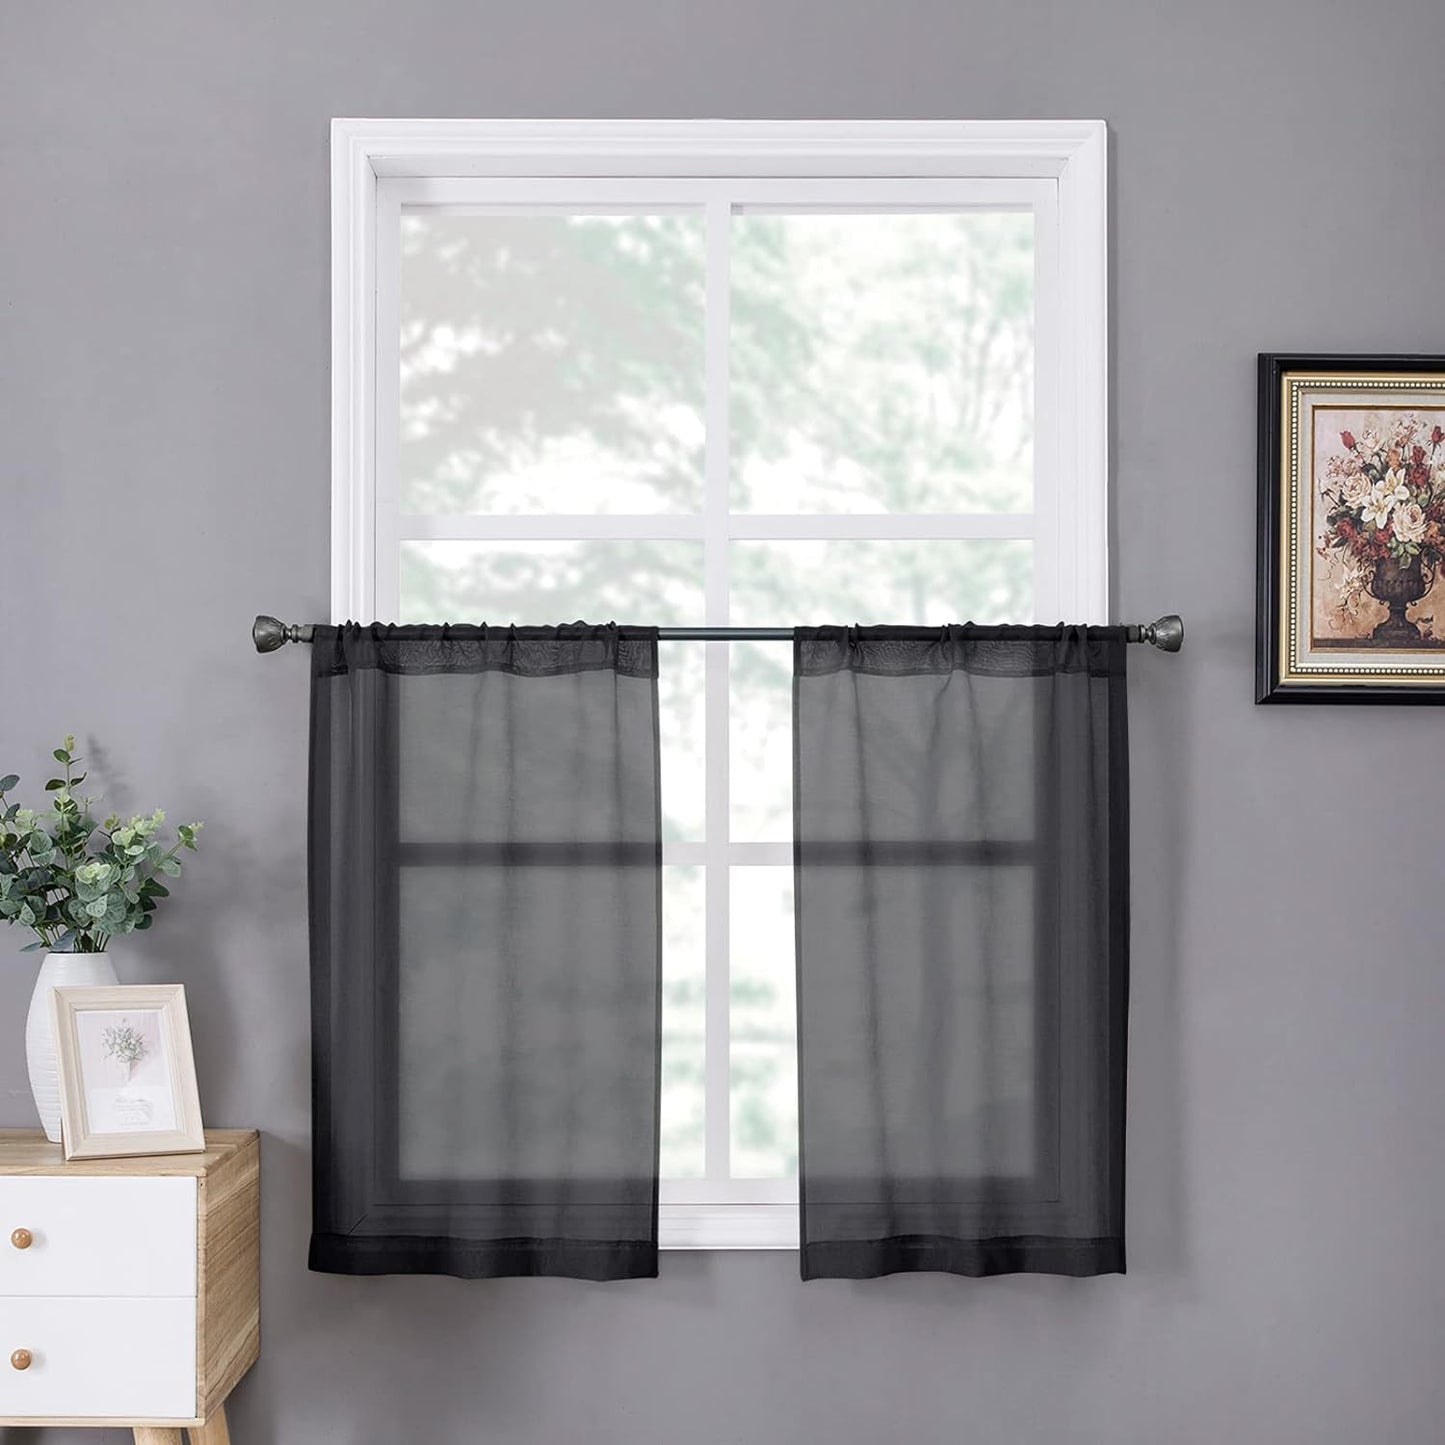 Tollpiz Short Sheer Curtains Linen Textured Bedroom Curtain Sheers Light Filtering Rod Pocket Voile Curtains for Living Room, 54 X 45 Inches Long, White, Set of 2 Panels  Tollpiz Tex Black 25"W X 24"L 